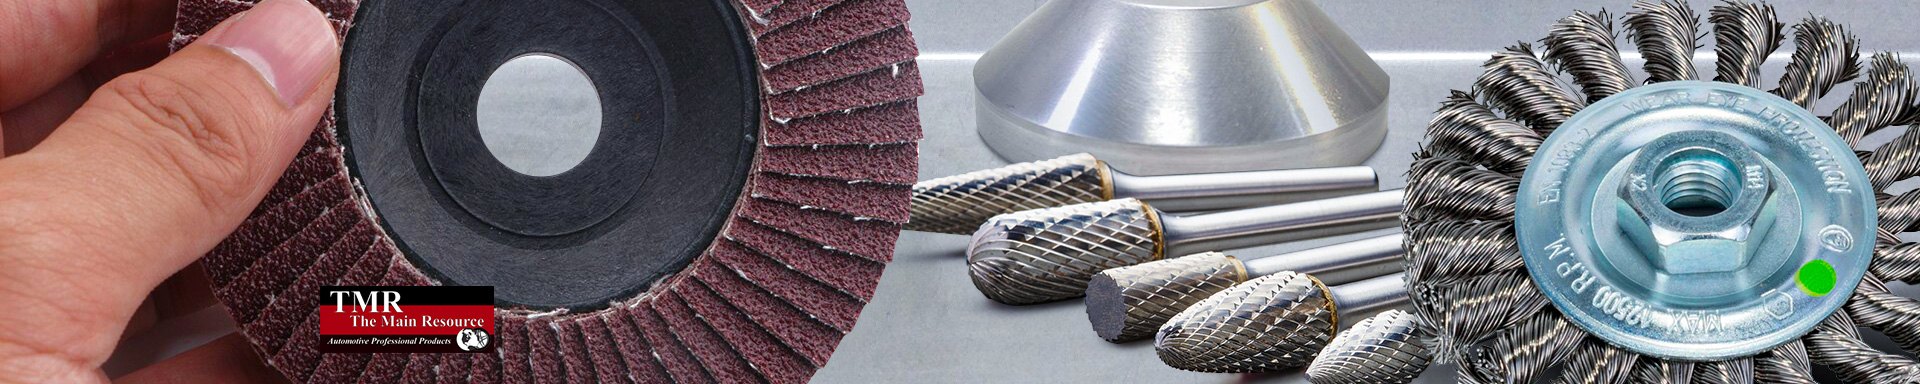 The Main Resource Abrasives